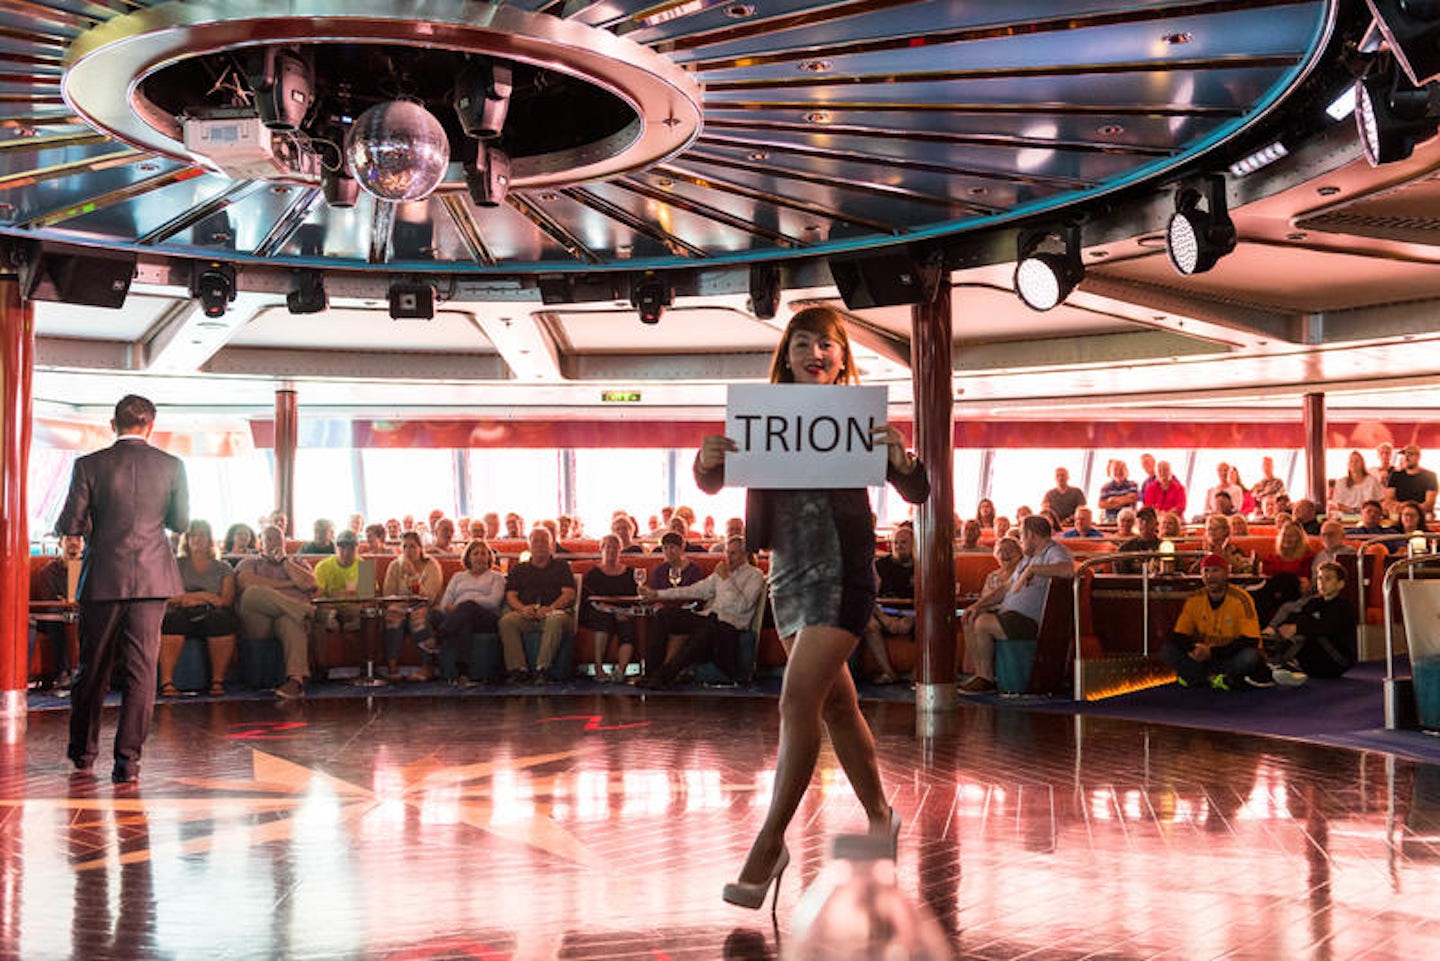 Biggest Liar Show at Spinnaker Lounge on Norwegian Pearl